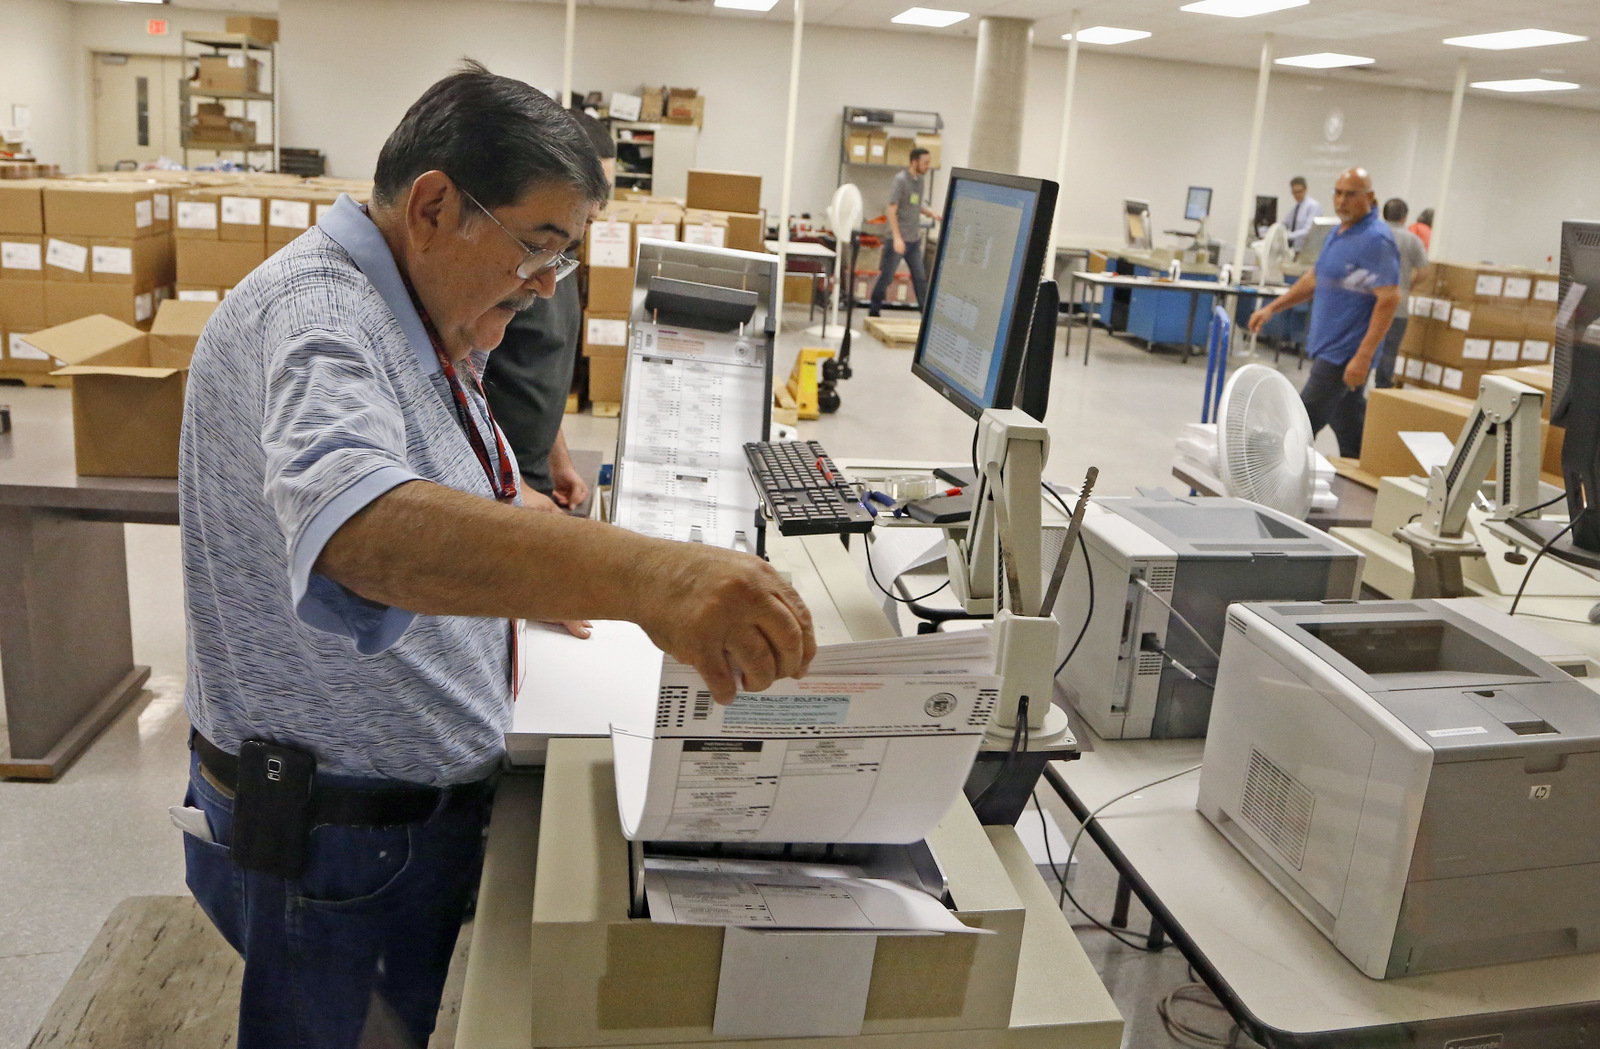 An Arizona elections official at the Maricopa inserts ballots into a machine to recount the votes in the 5th Congressional District race Tuesday, Sept. 13, 2016, in Phoenix. (AP Photo/Ross D. Franklin)